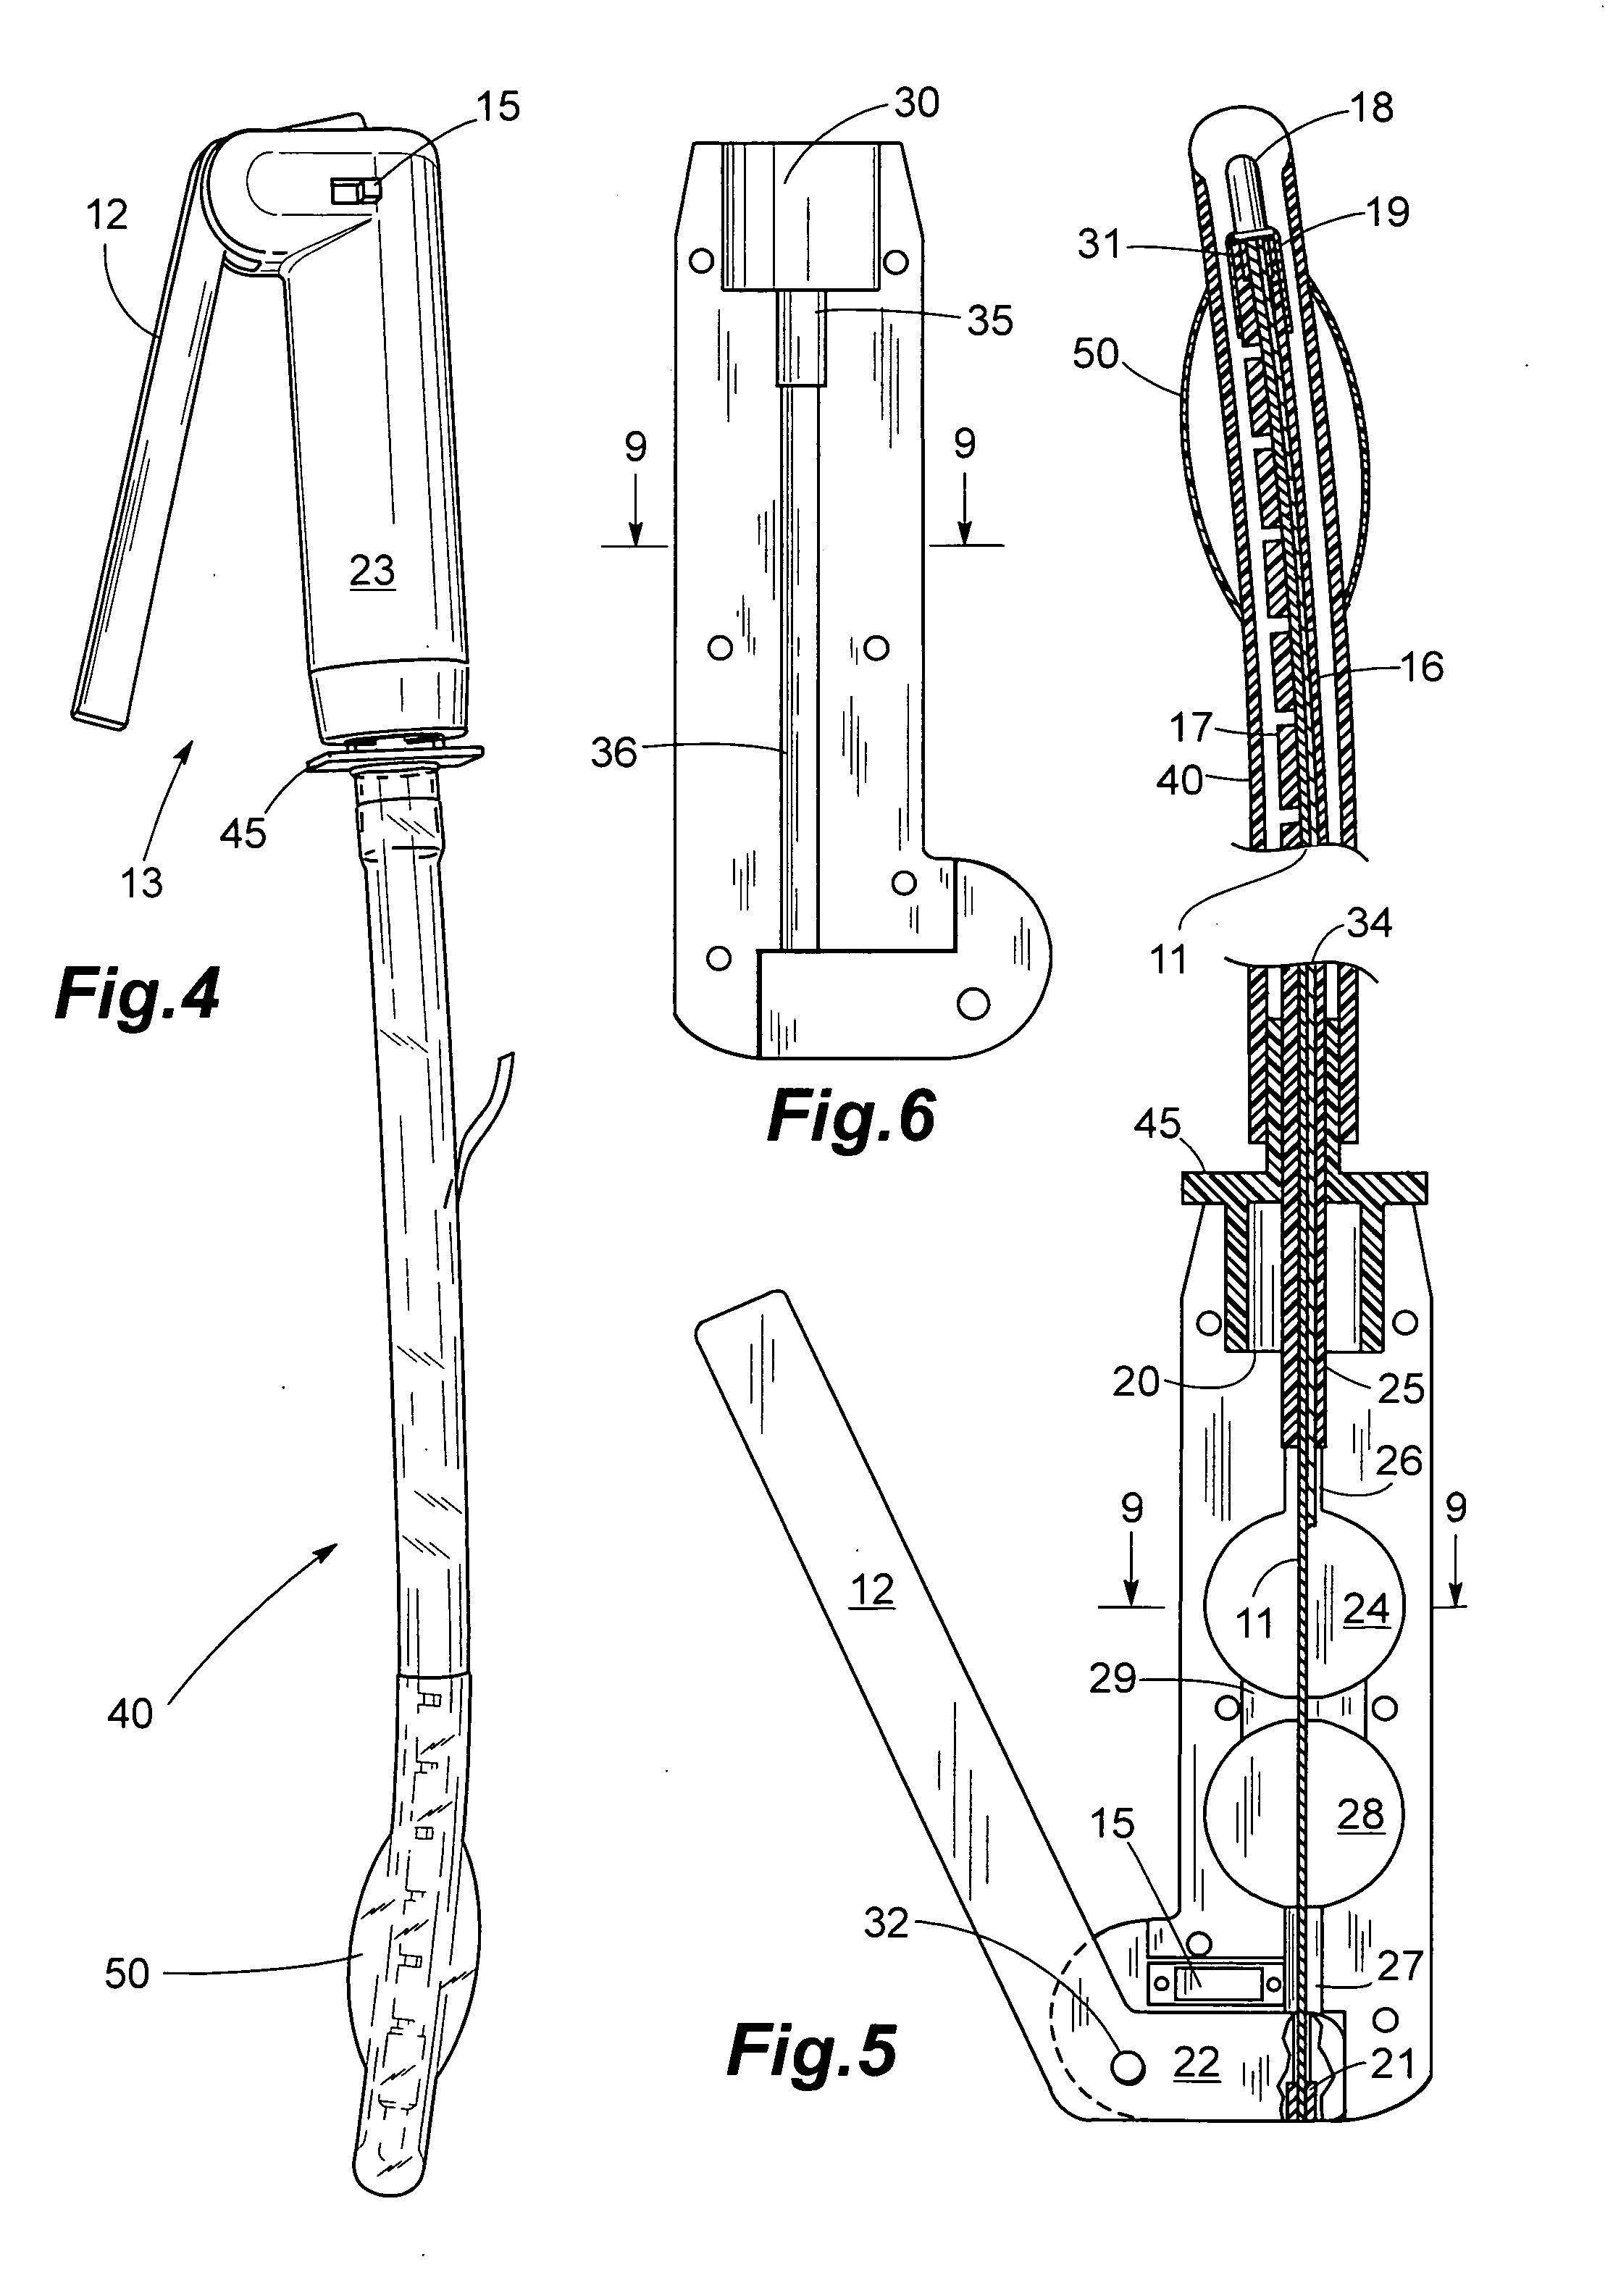 Endo-tracheal intubation device with adjustably bendable stylet